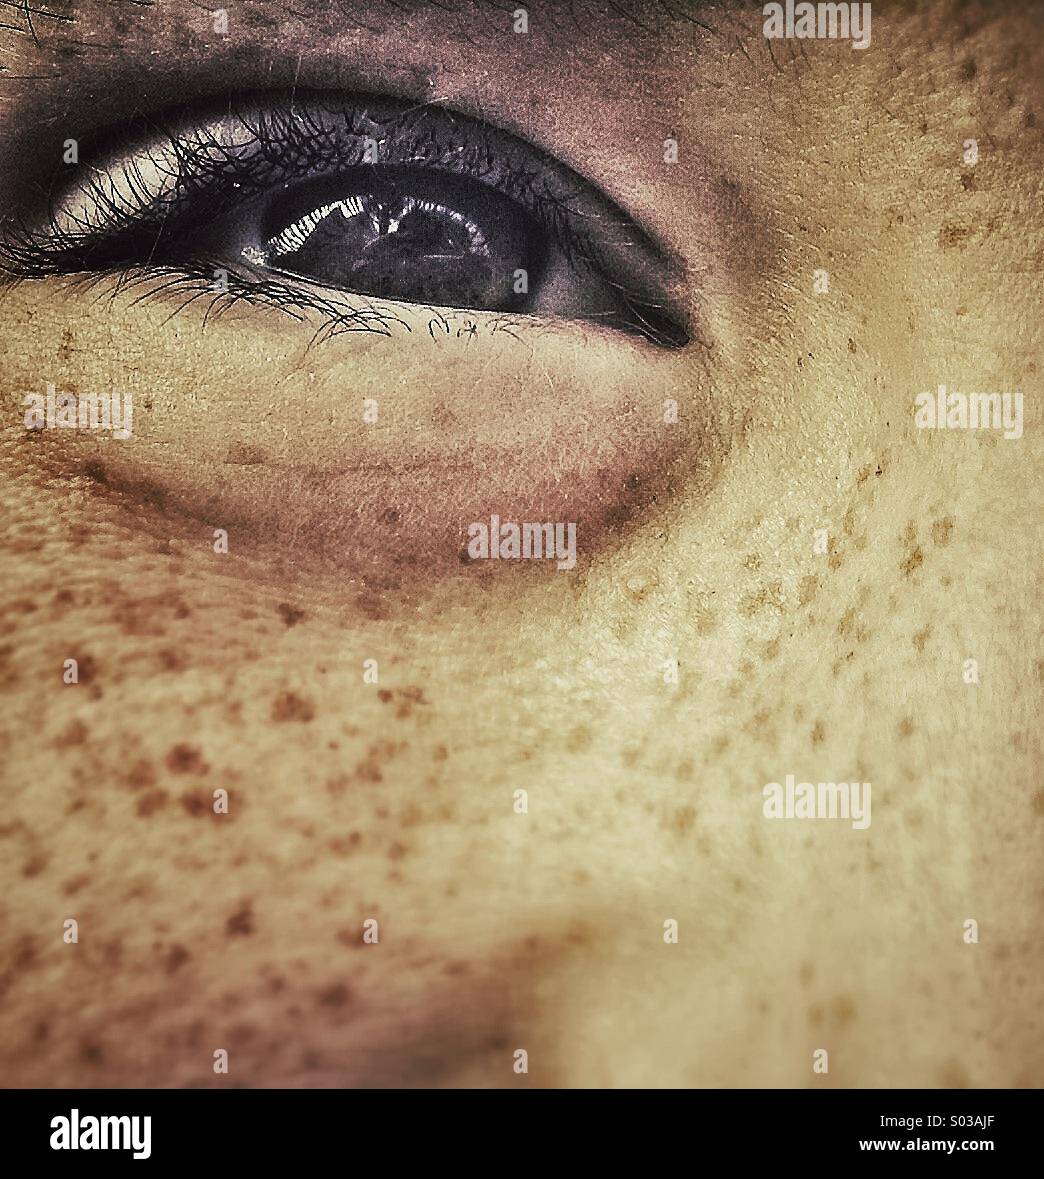 Freckled eye smiling. Close up half face of young cheeky boy smiling. Stock Photo